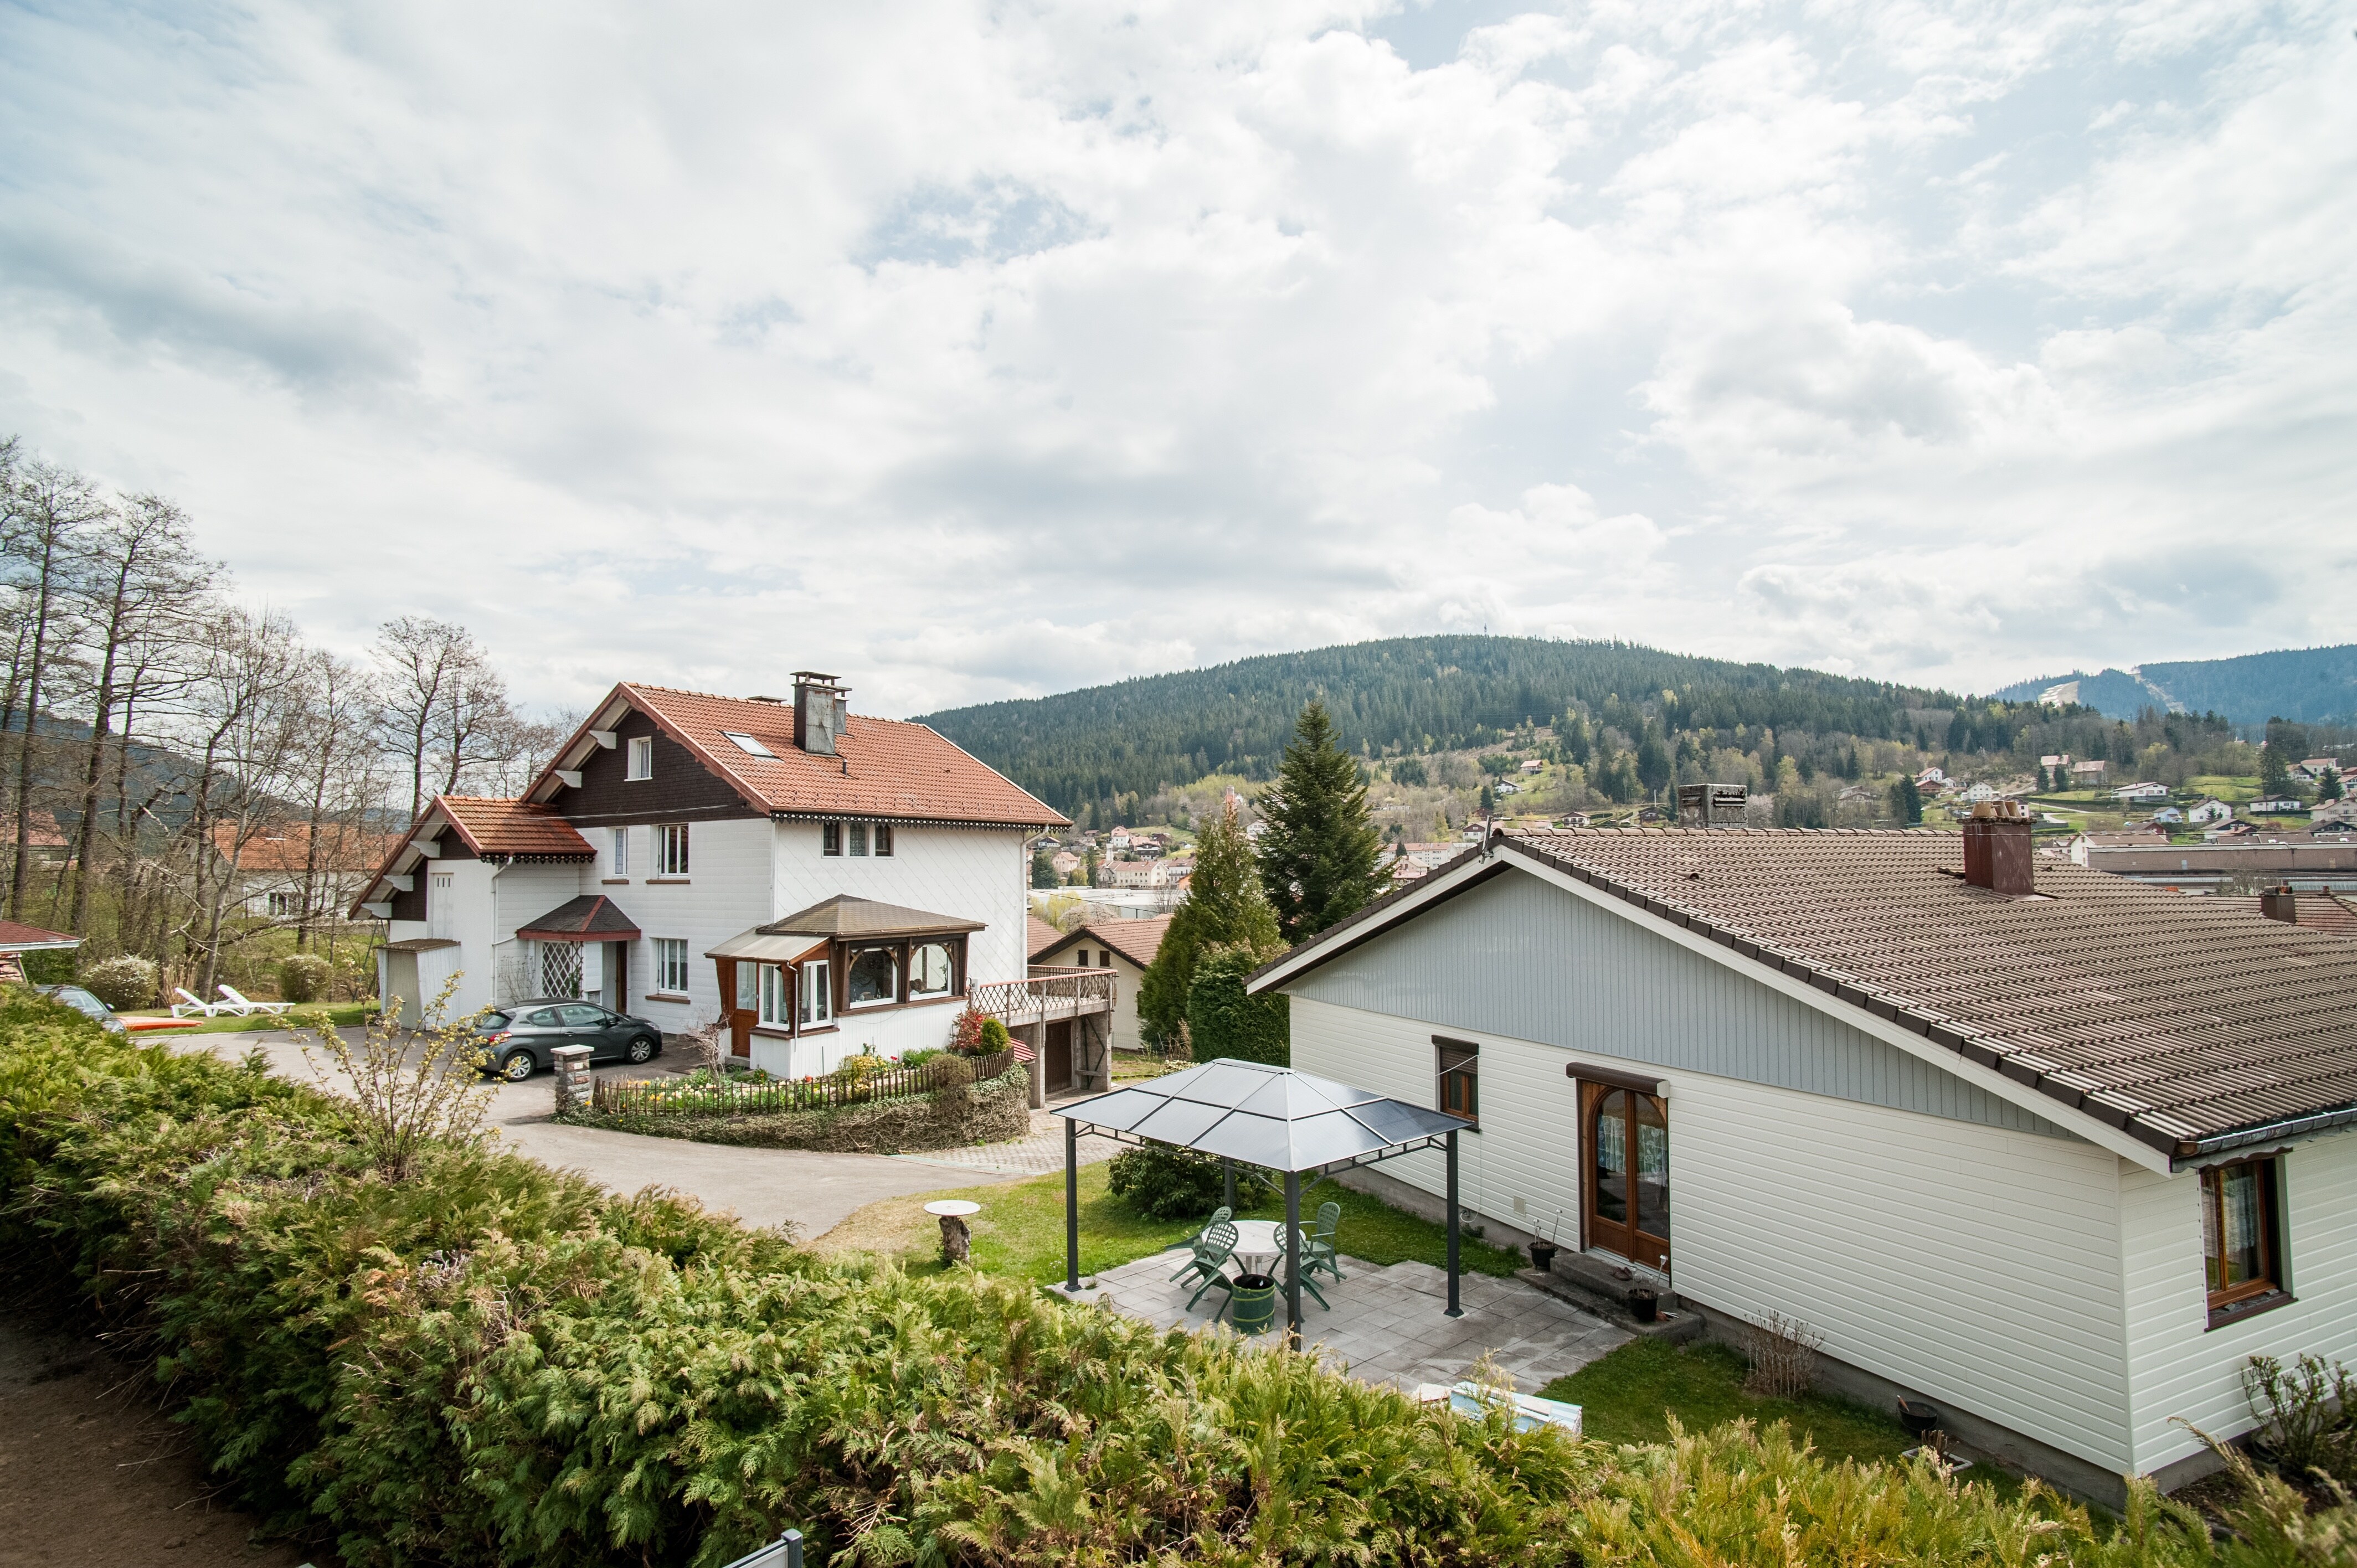 Property Image 1 - Comfortable two bedroom chalet in the High Vosges city of Gerardmer